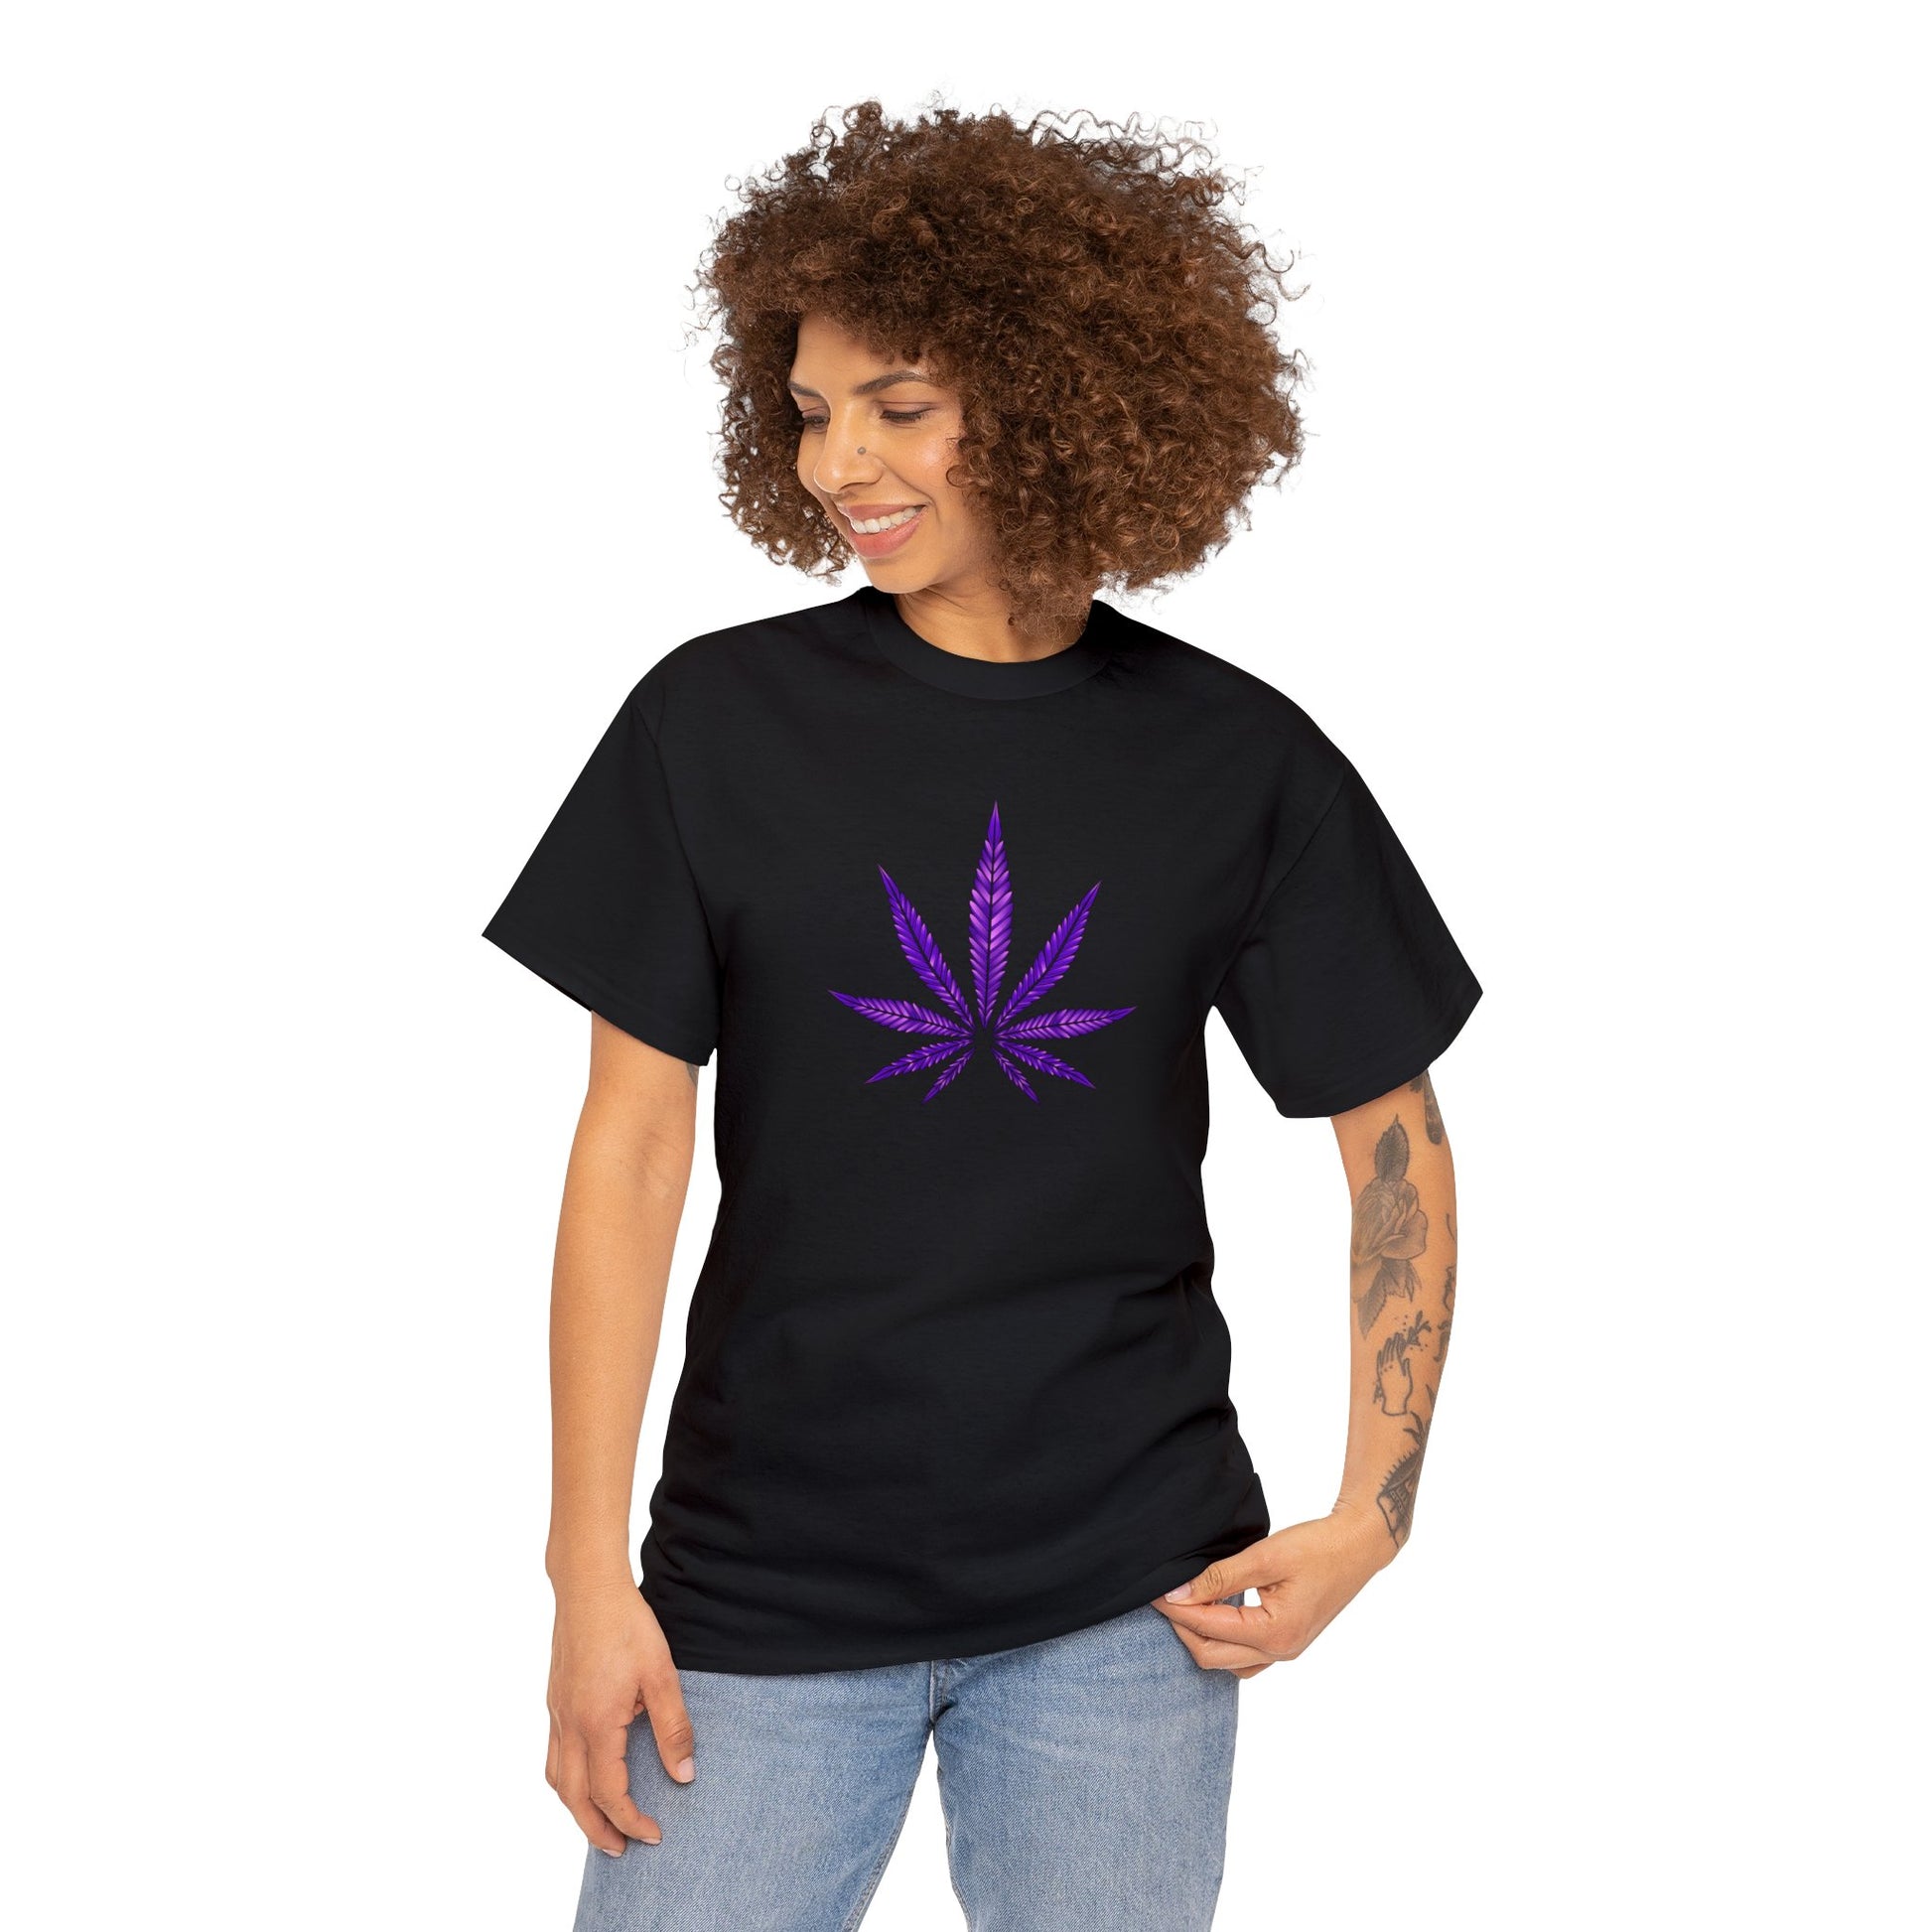 A person stands facing the camera, wearing a Purple Cannabis Leaf Tee. The individual has curly hair and a visible tattoo on their left arm.